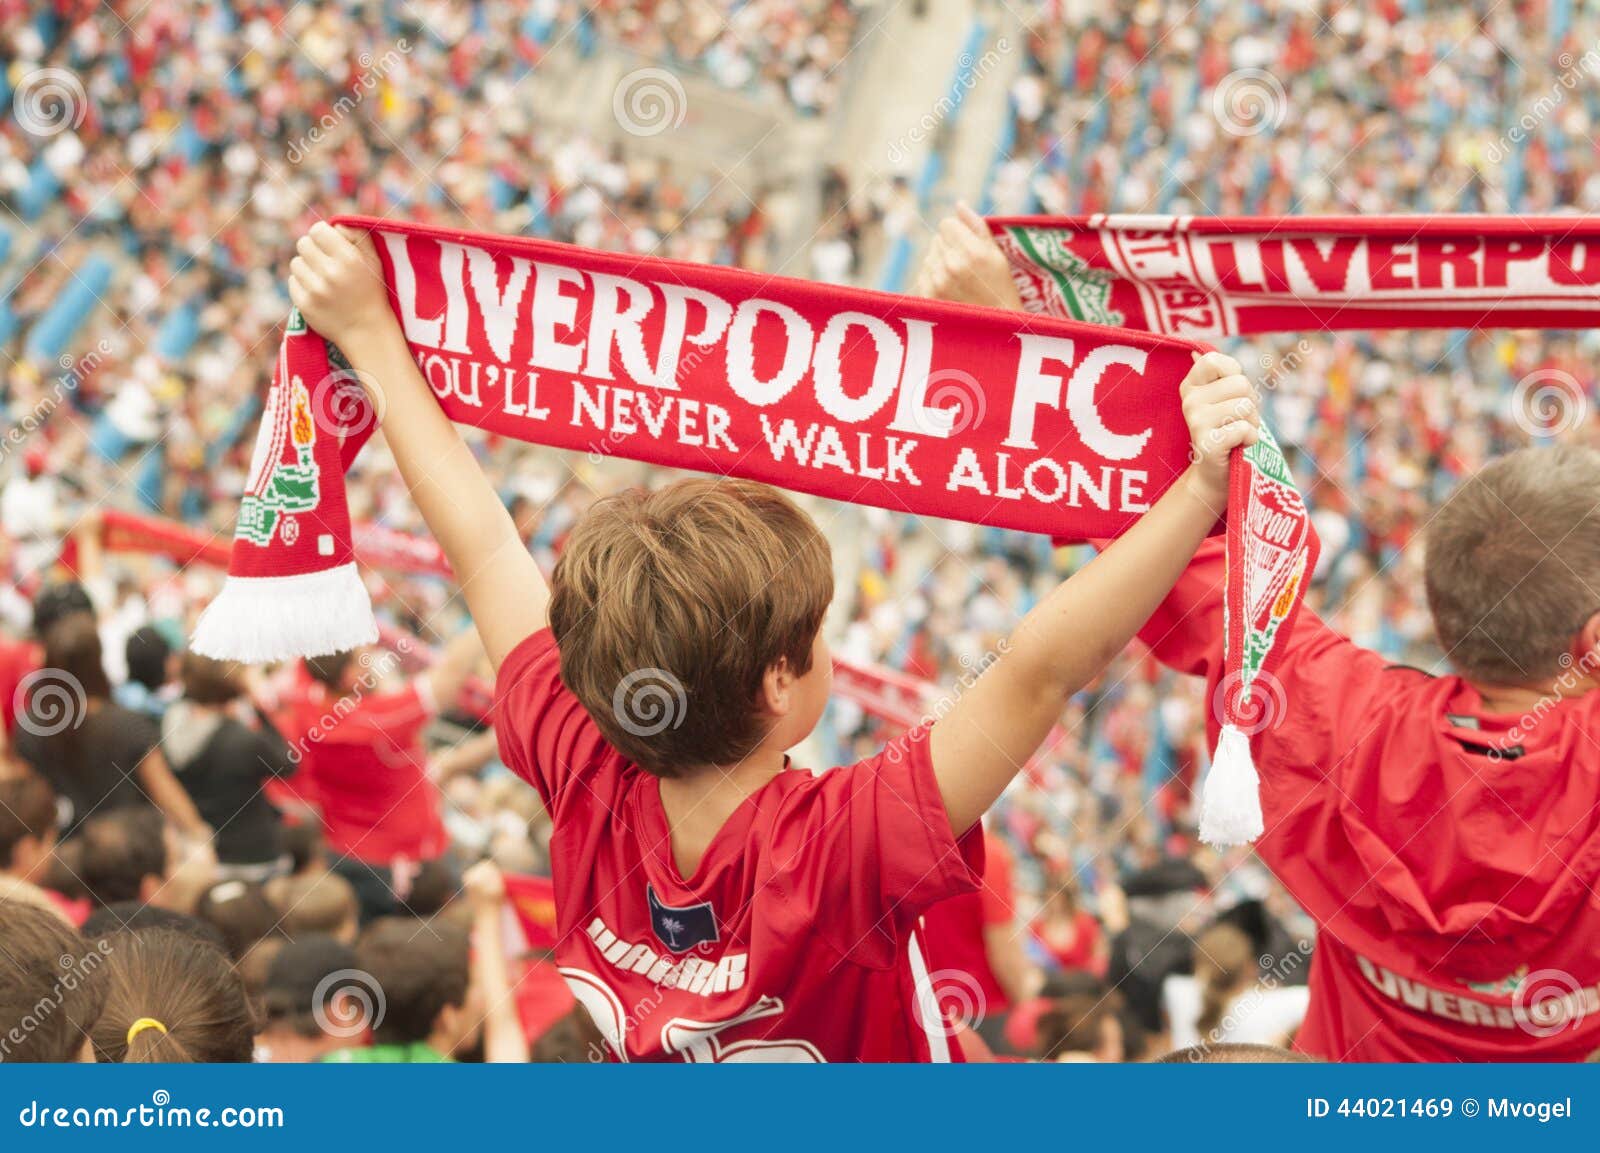 Liverpool FC Editorial Stock Image - Image: 44021469